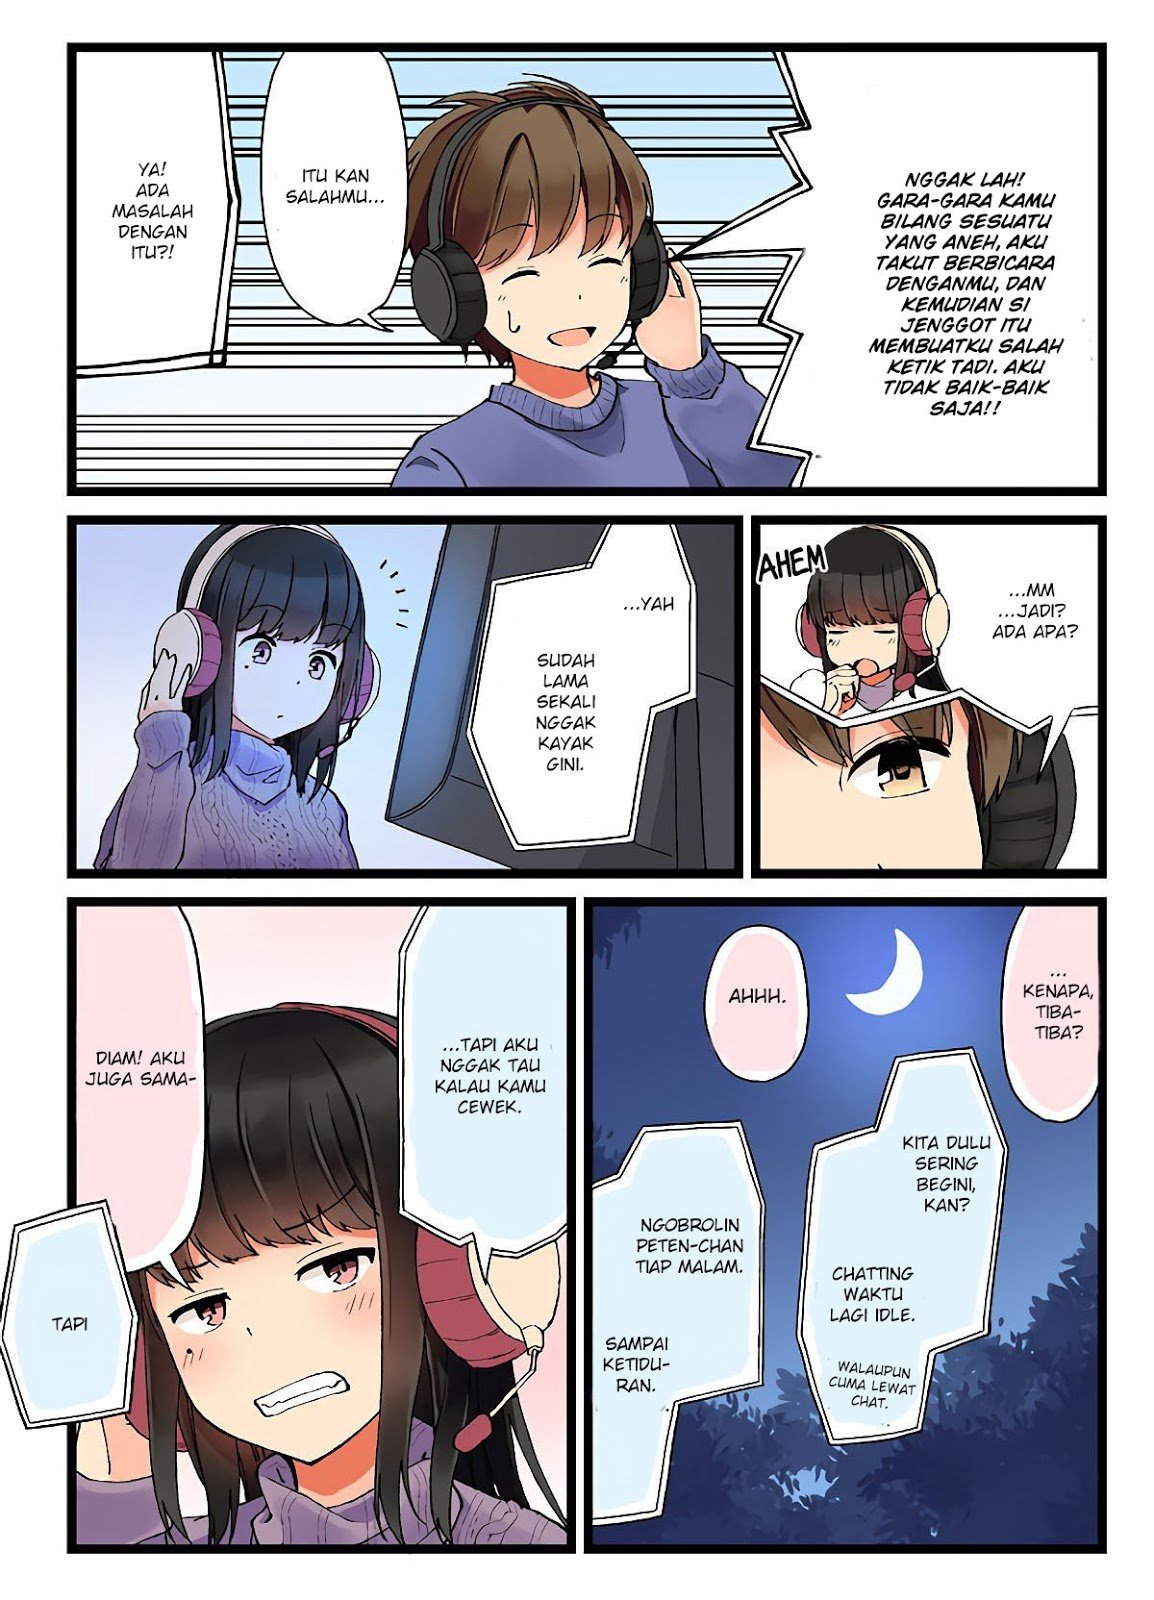 Hanging Out with a Gamer Girl Chapter 08